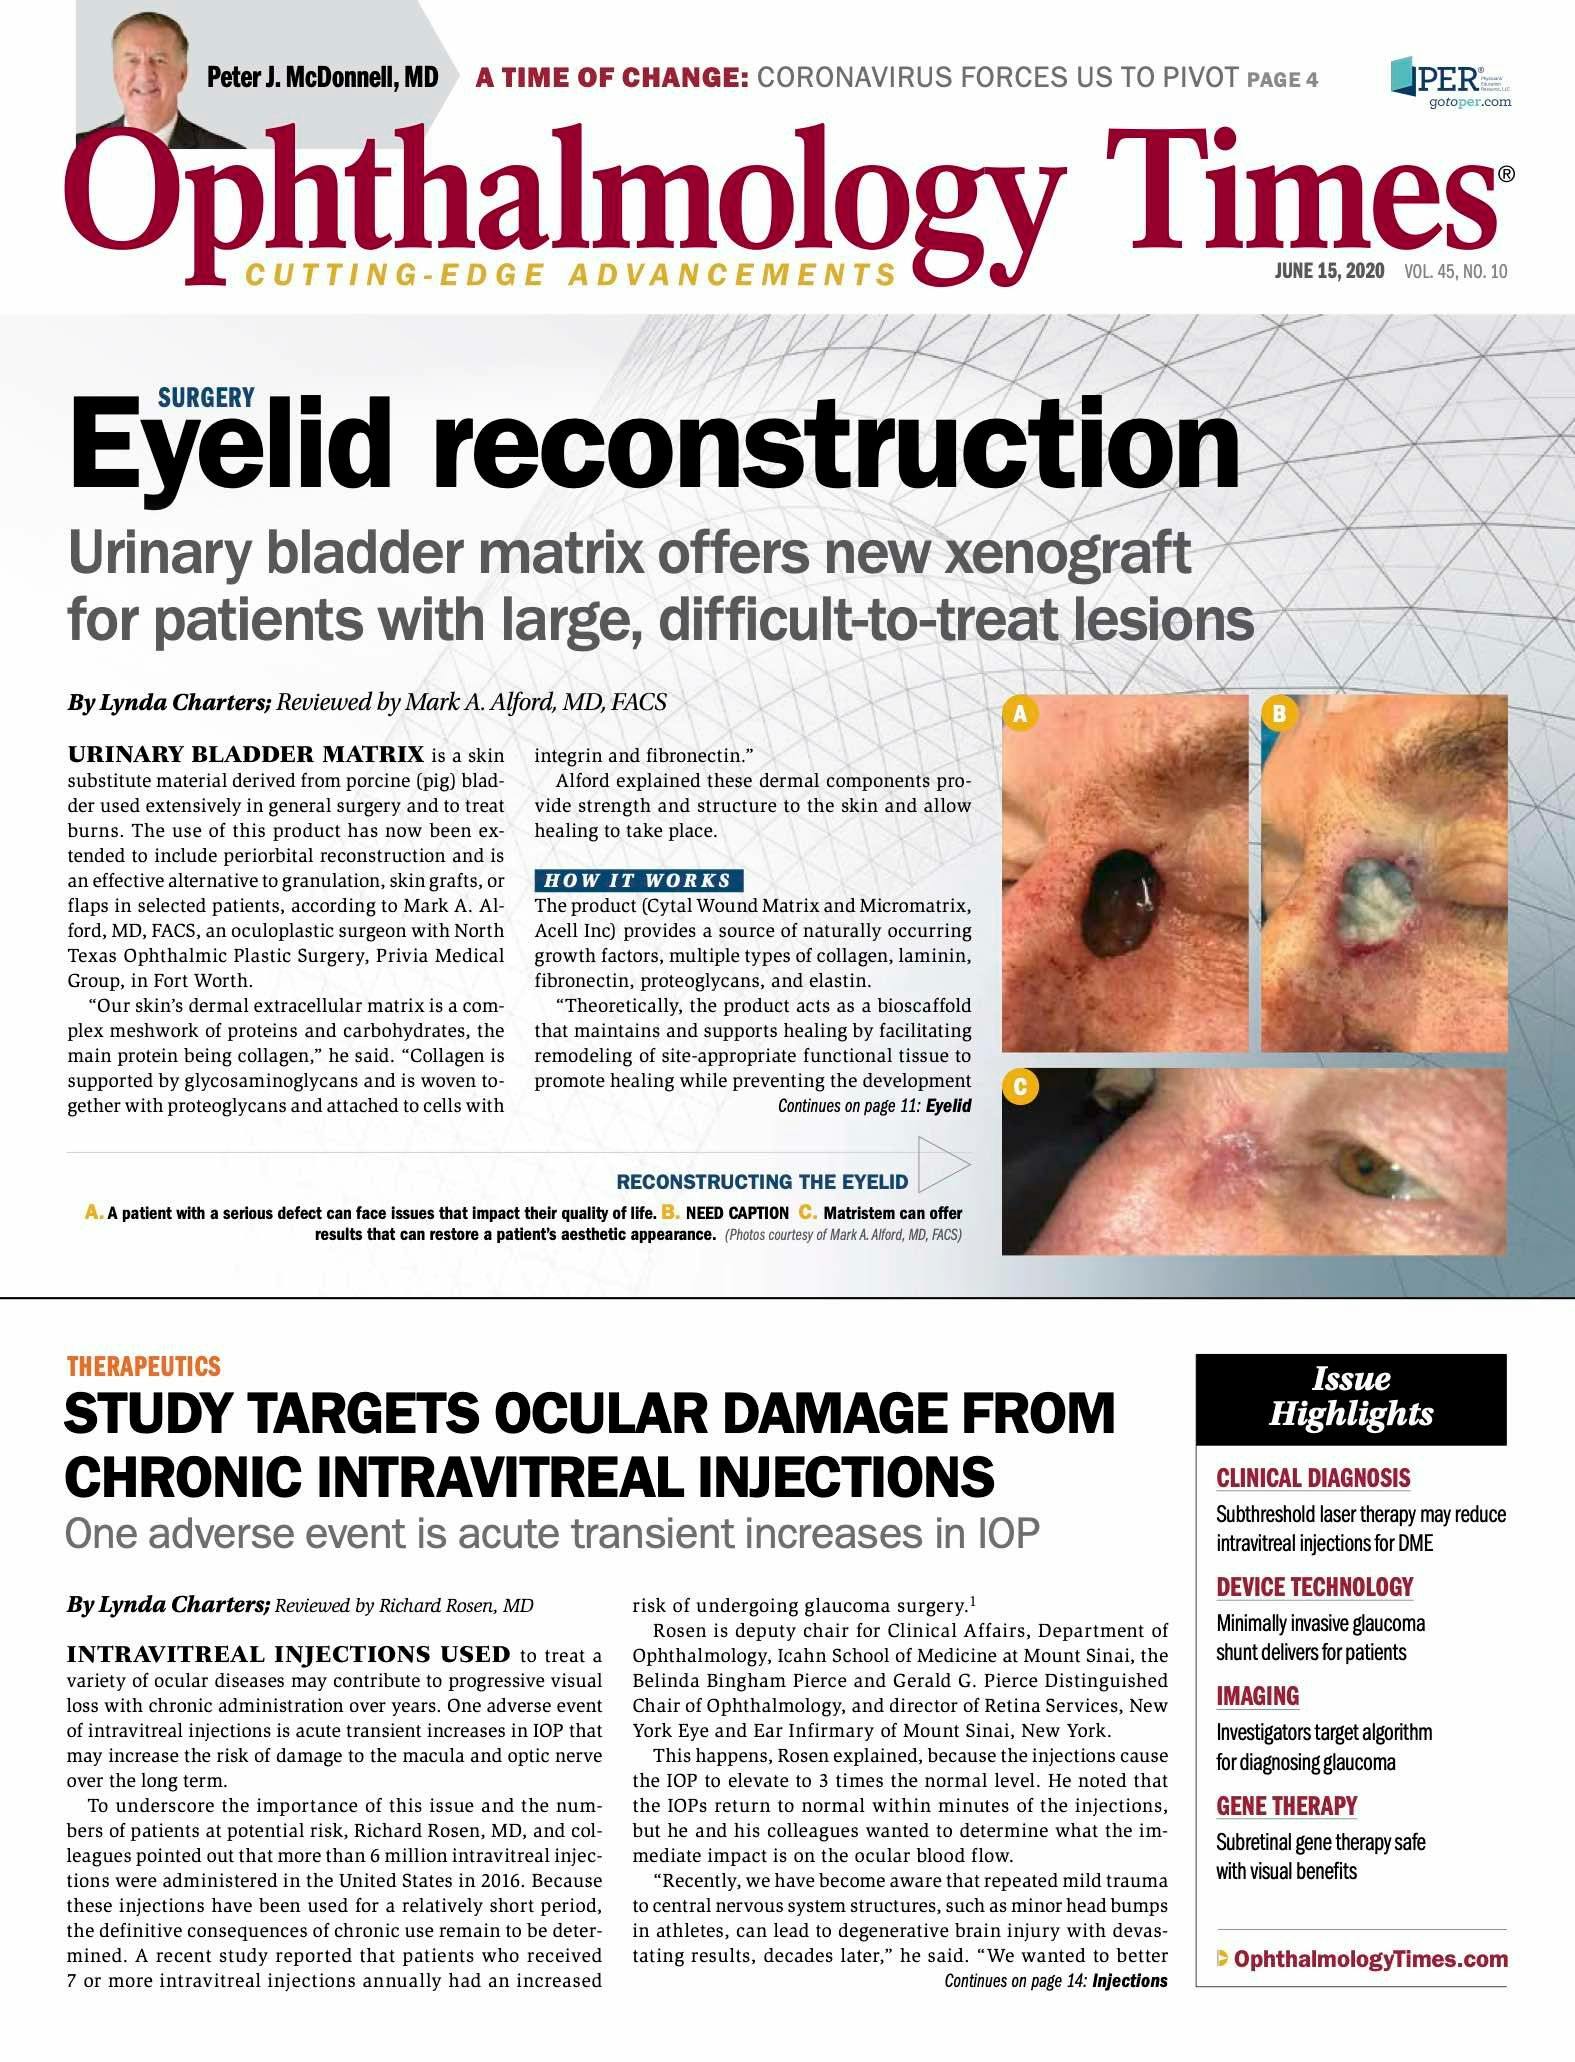 Ophthalmology Times: June 15, 2020